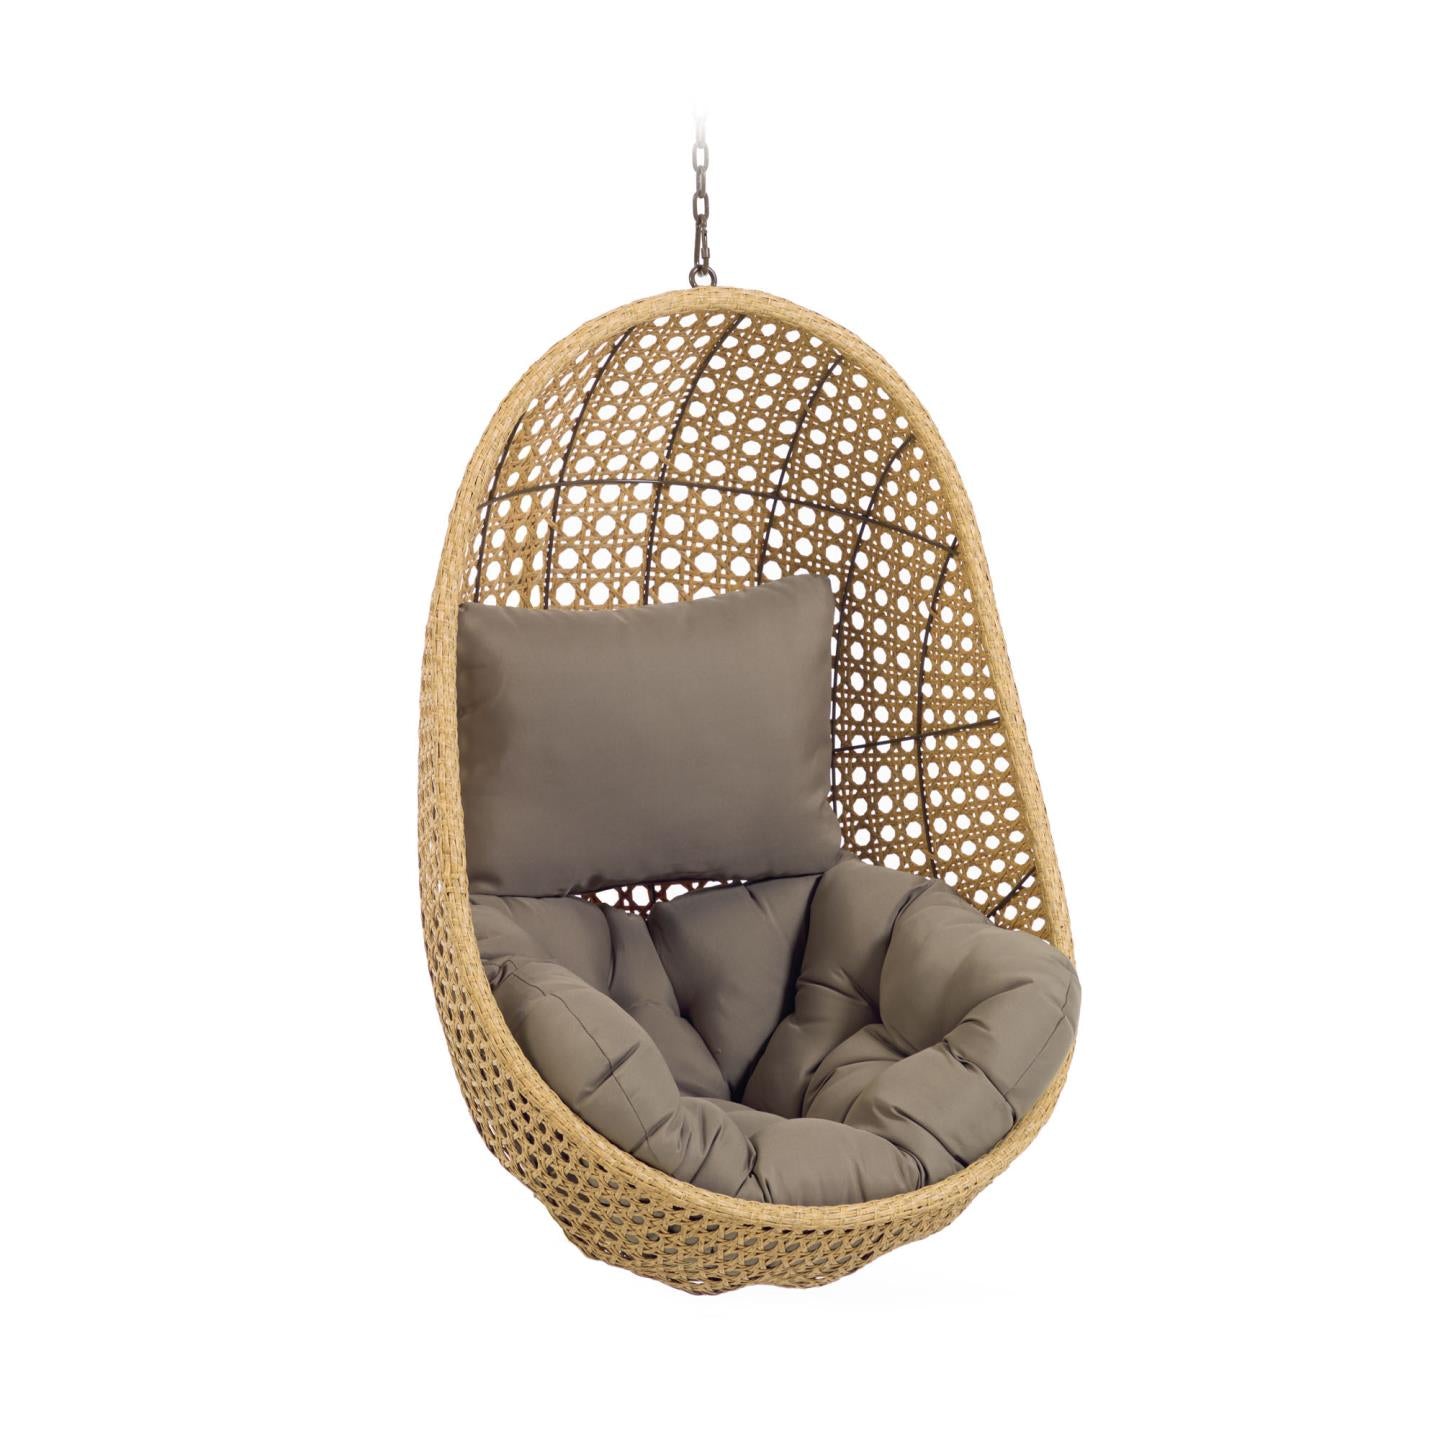 Cira hanging chair with natural finish